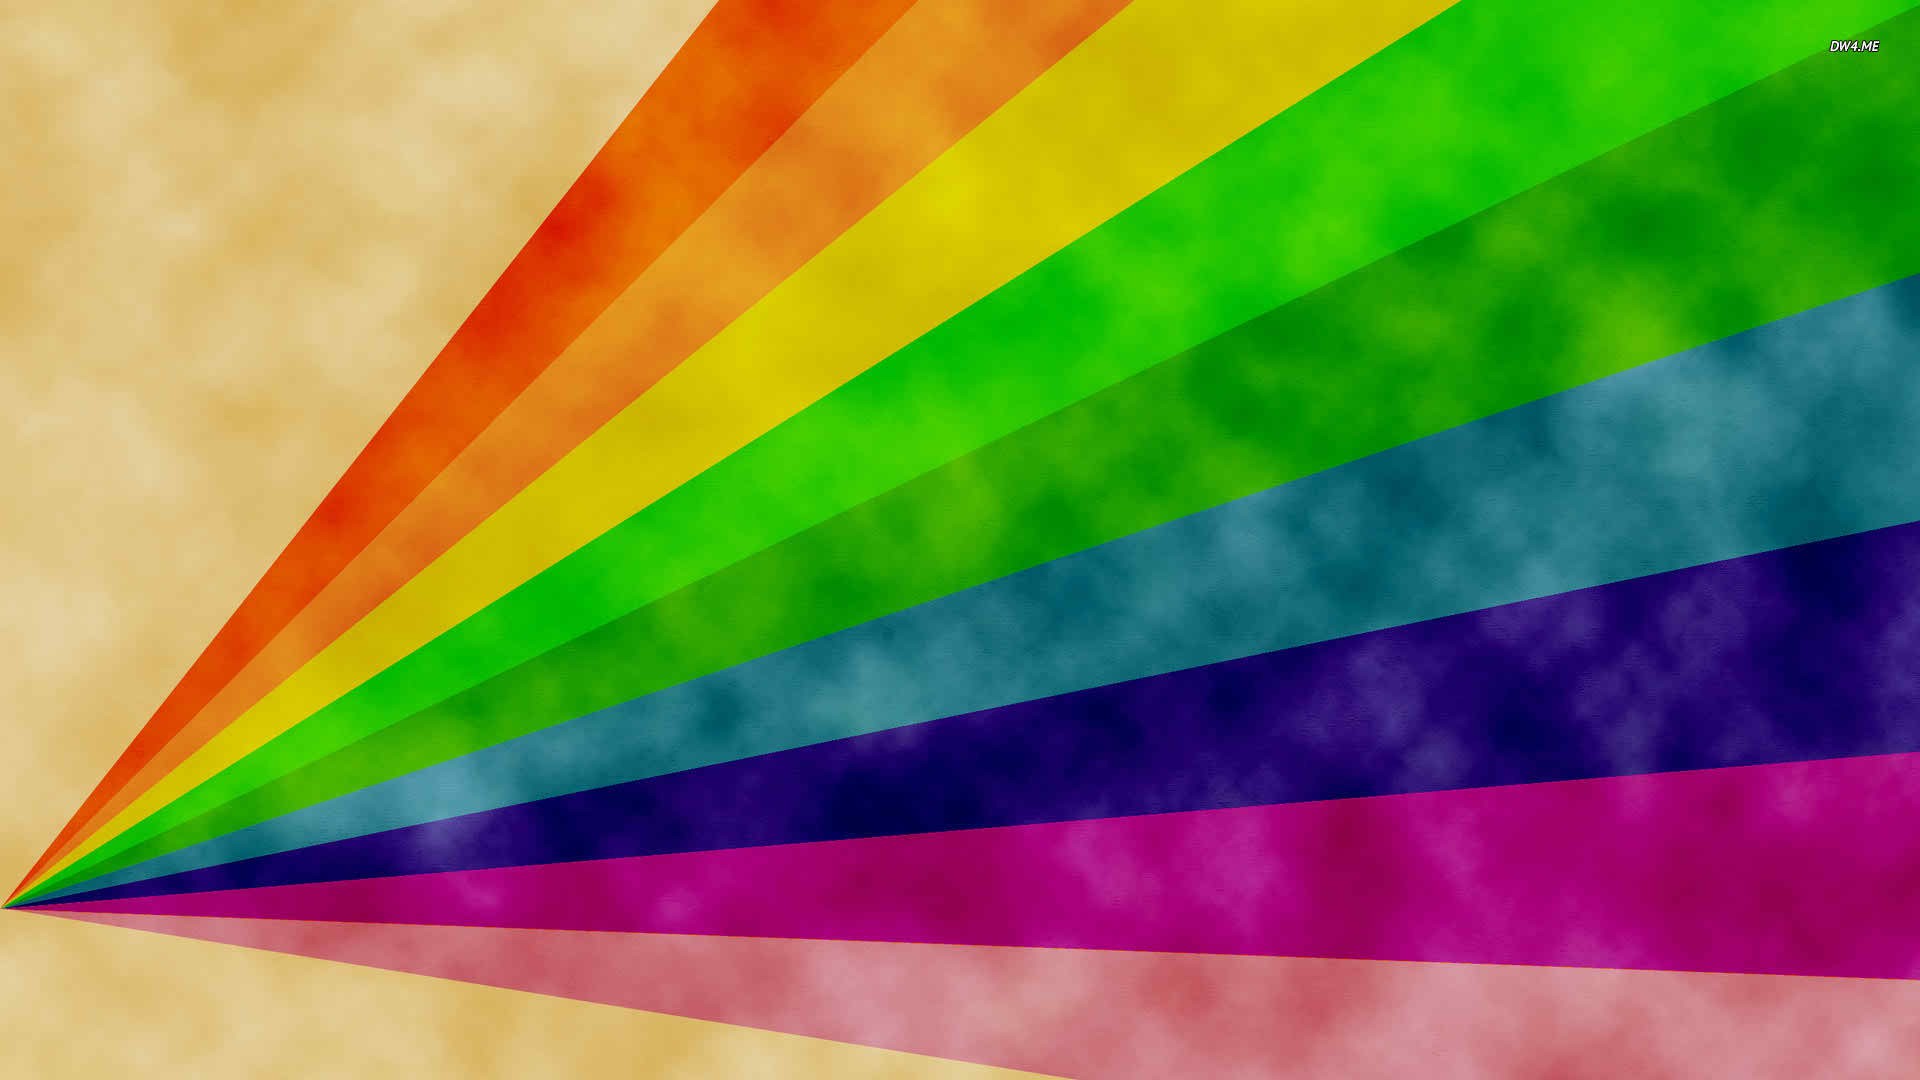 Rainbow Colors Background Wallpaper HD With Resolution 1920X1080 pixel. You can make this wallpaper for your Desktop Computer Backgrounds, Mac Wallpapers, Android Lock screen or iPhone Screensavers